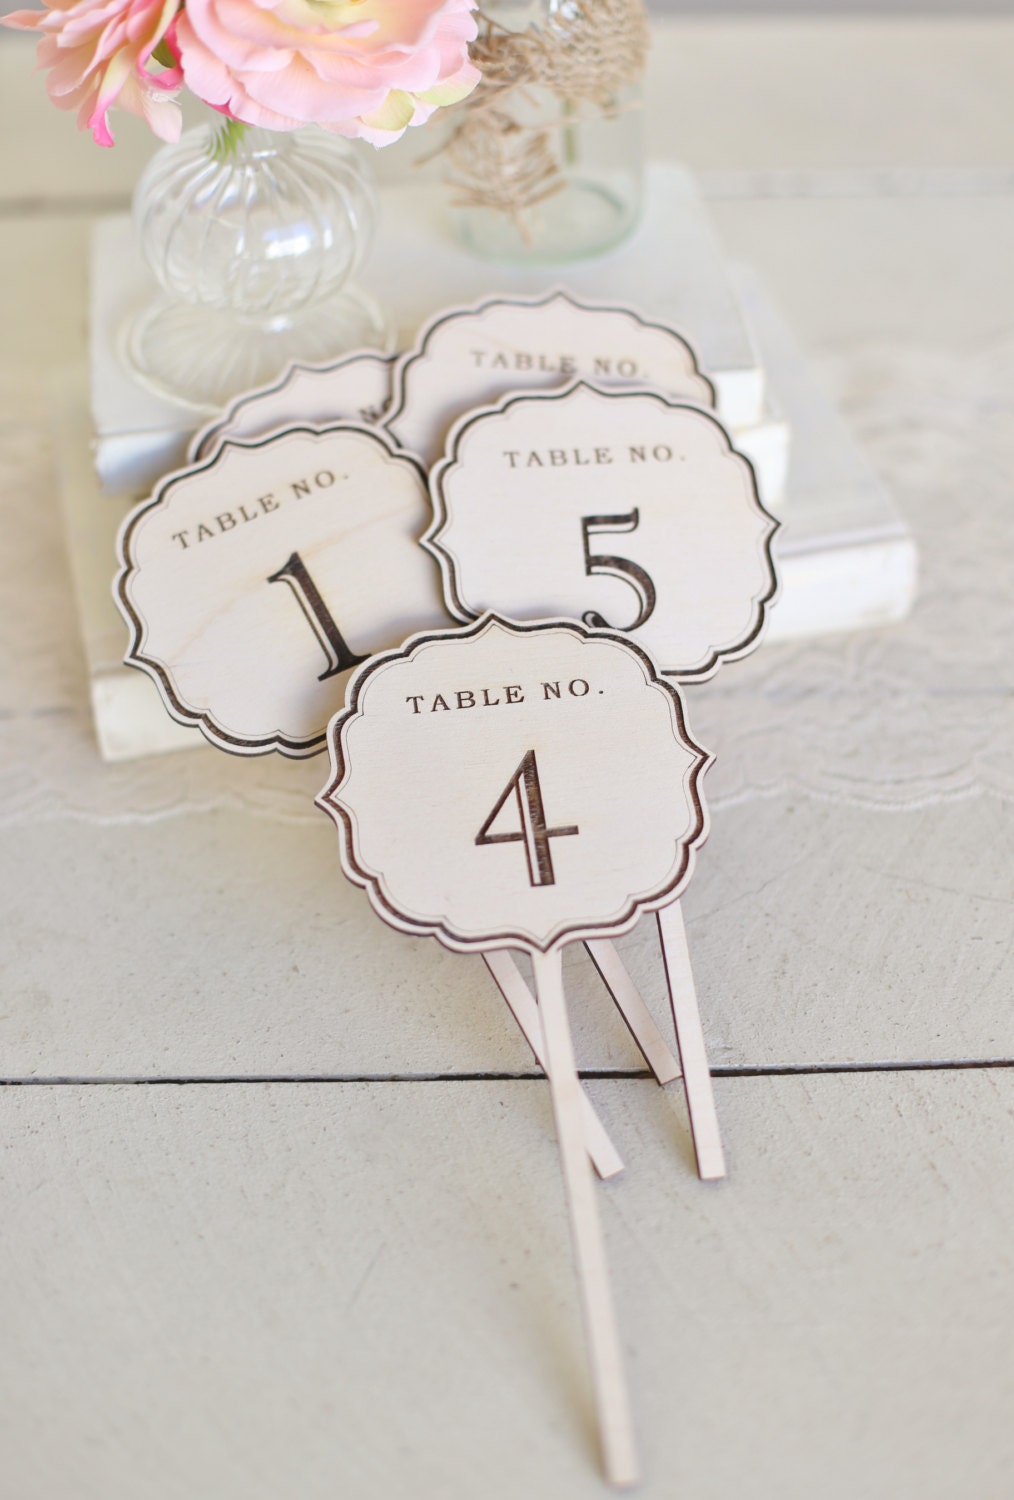 Rustic Wood Table Numbers Vintage Inspired Wedding by Morgann Hill Designs #BraggingBags #MorgannHillDesigns